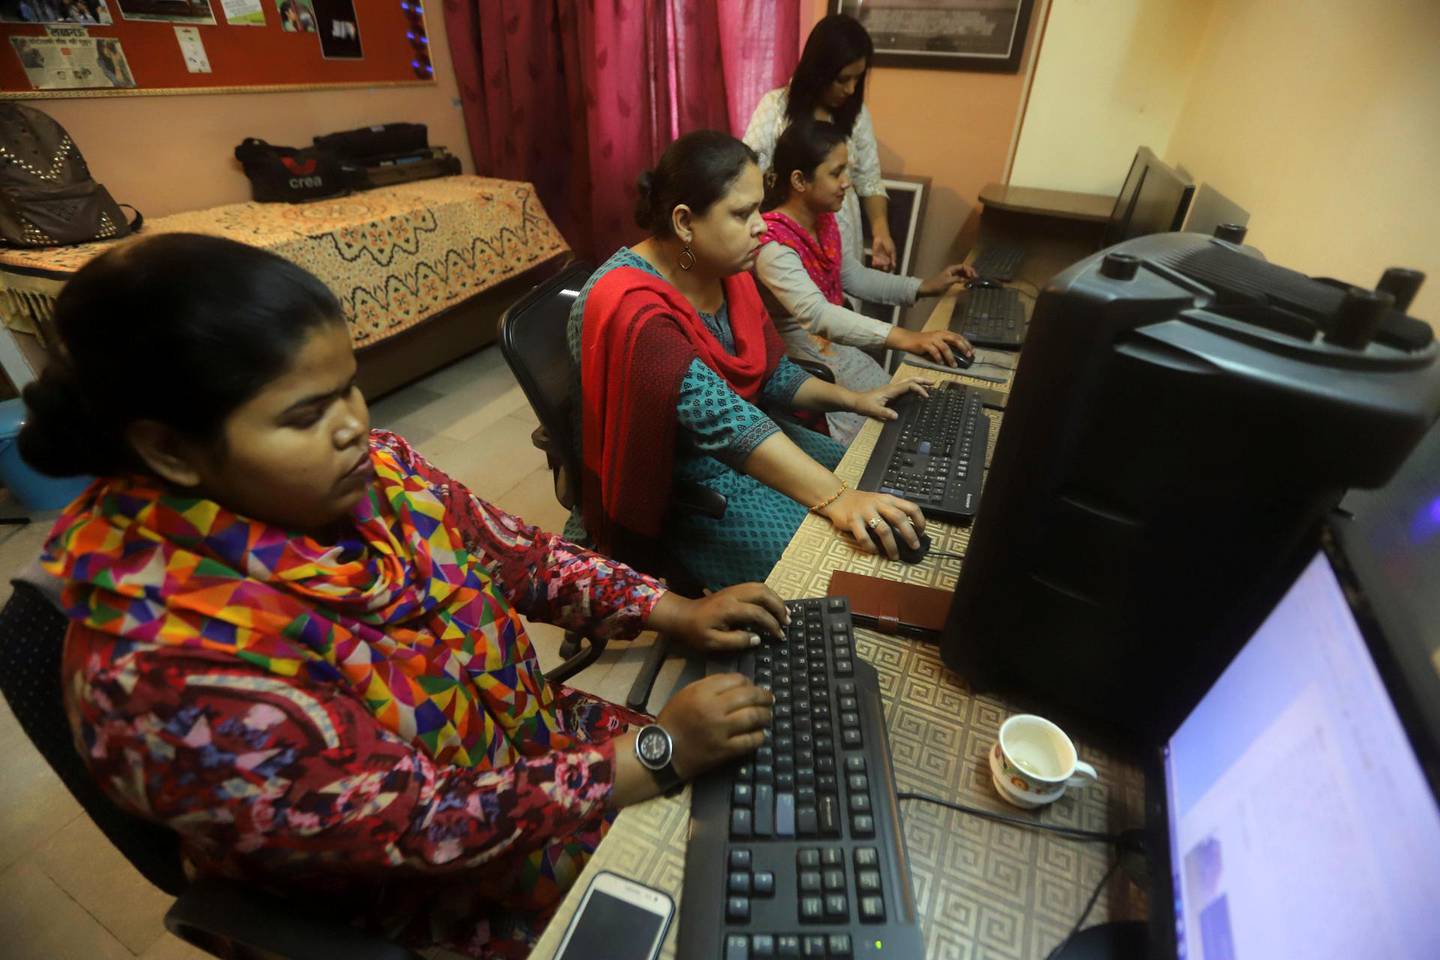 Muslim woman and girl work on video editing at an institute in Lucknow, April 7, 2019. The National/Jitendra Prakash 